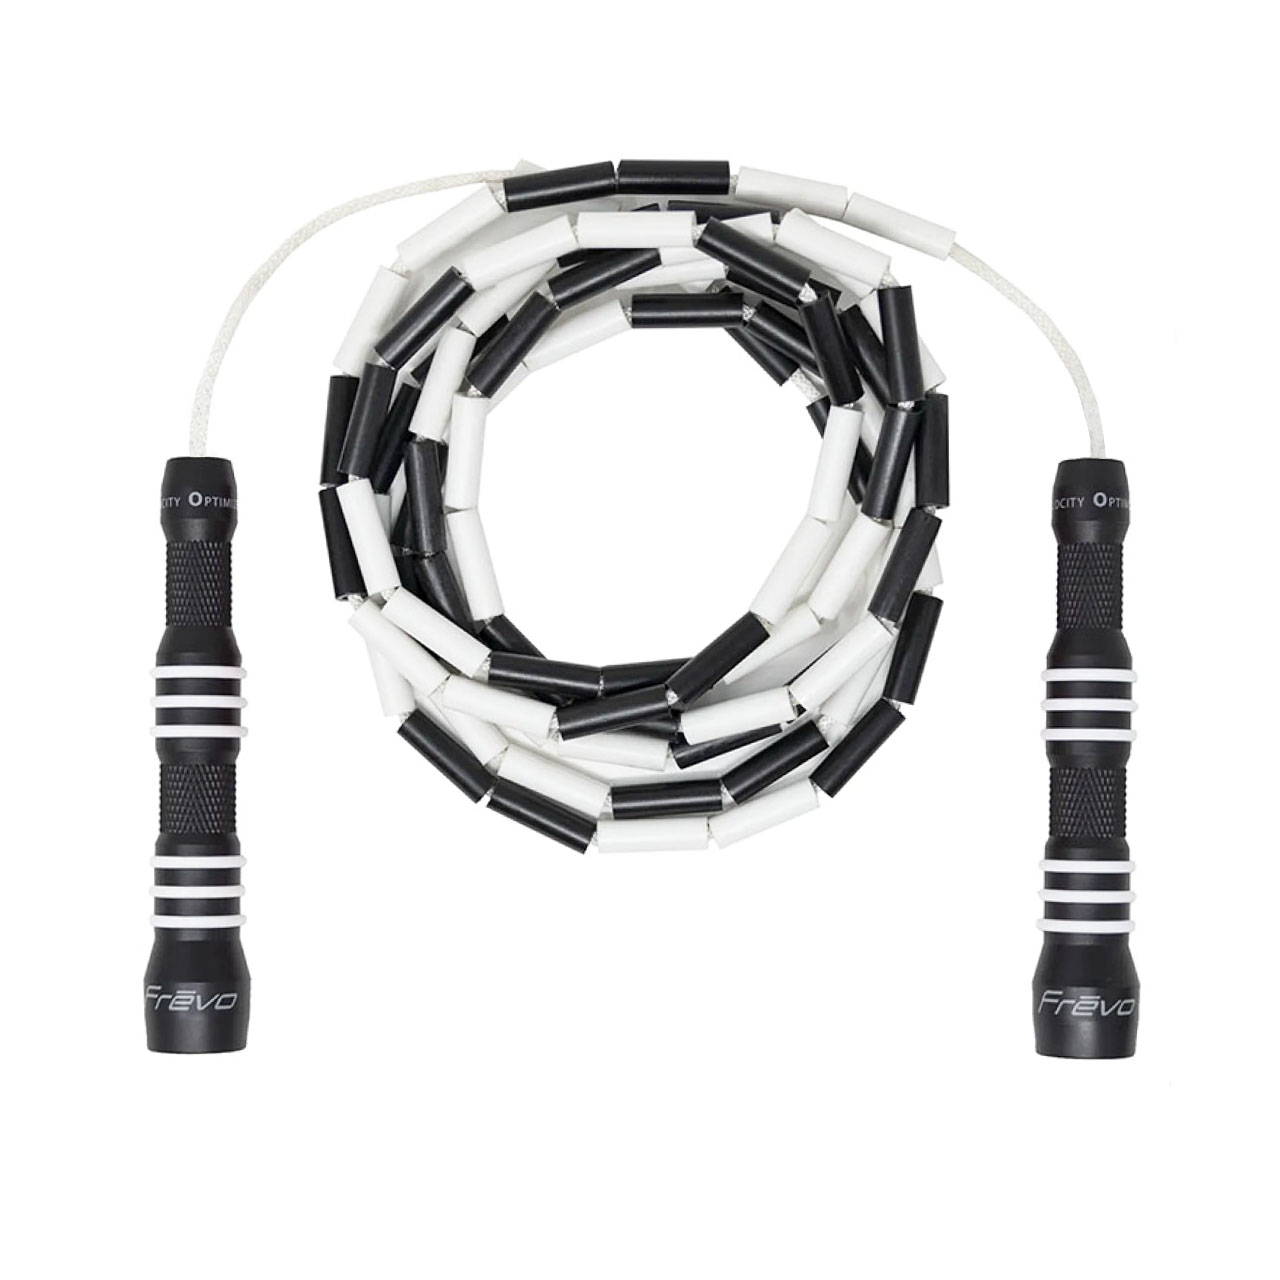 TYR WZA Limited Edition Frēvo Jump Rope